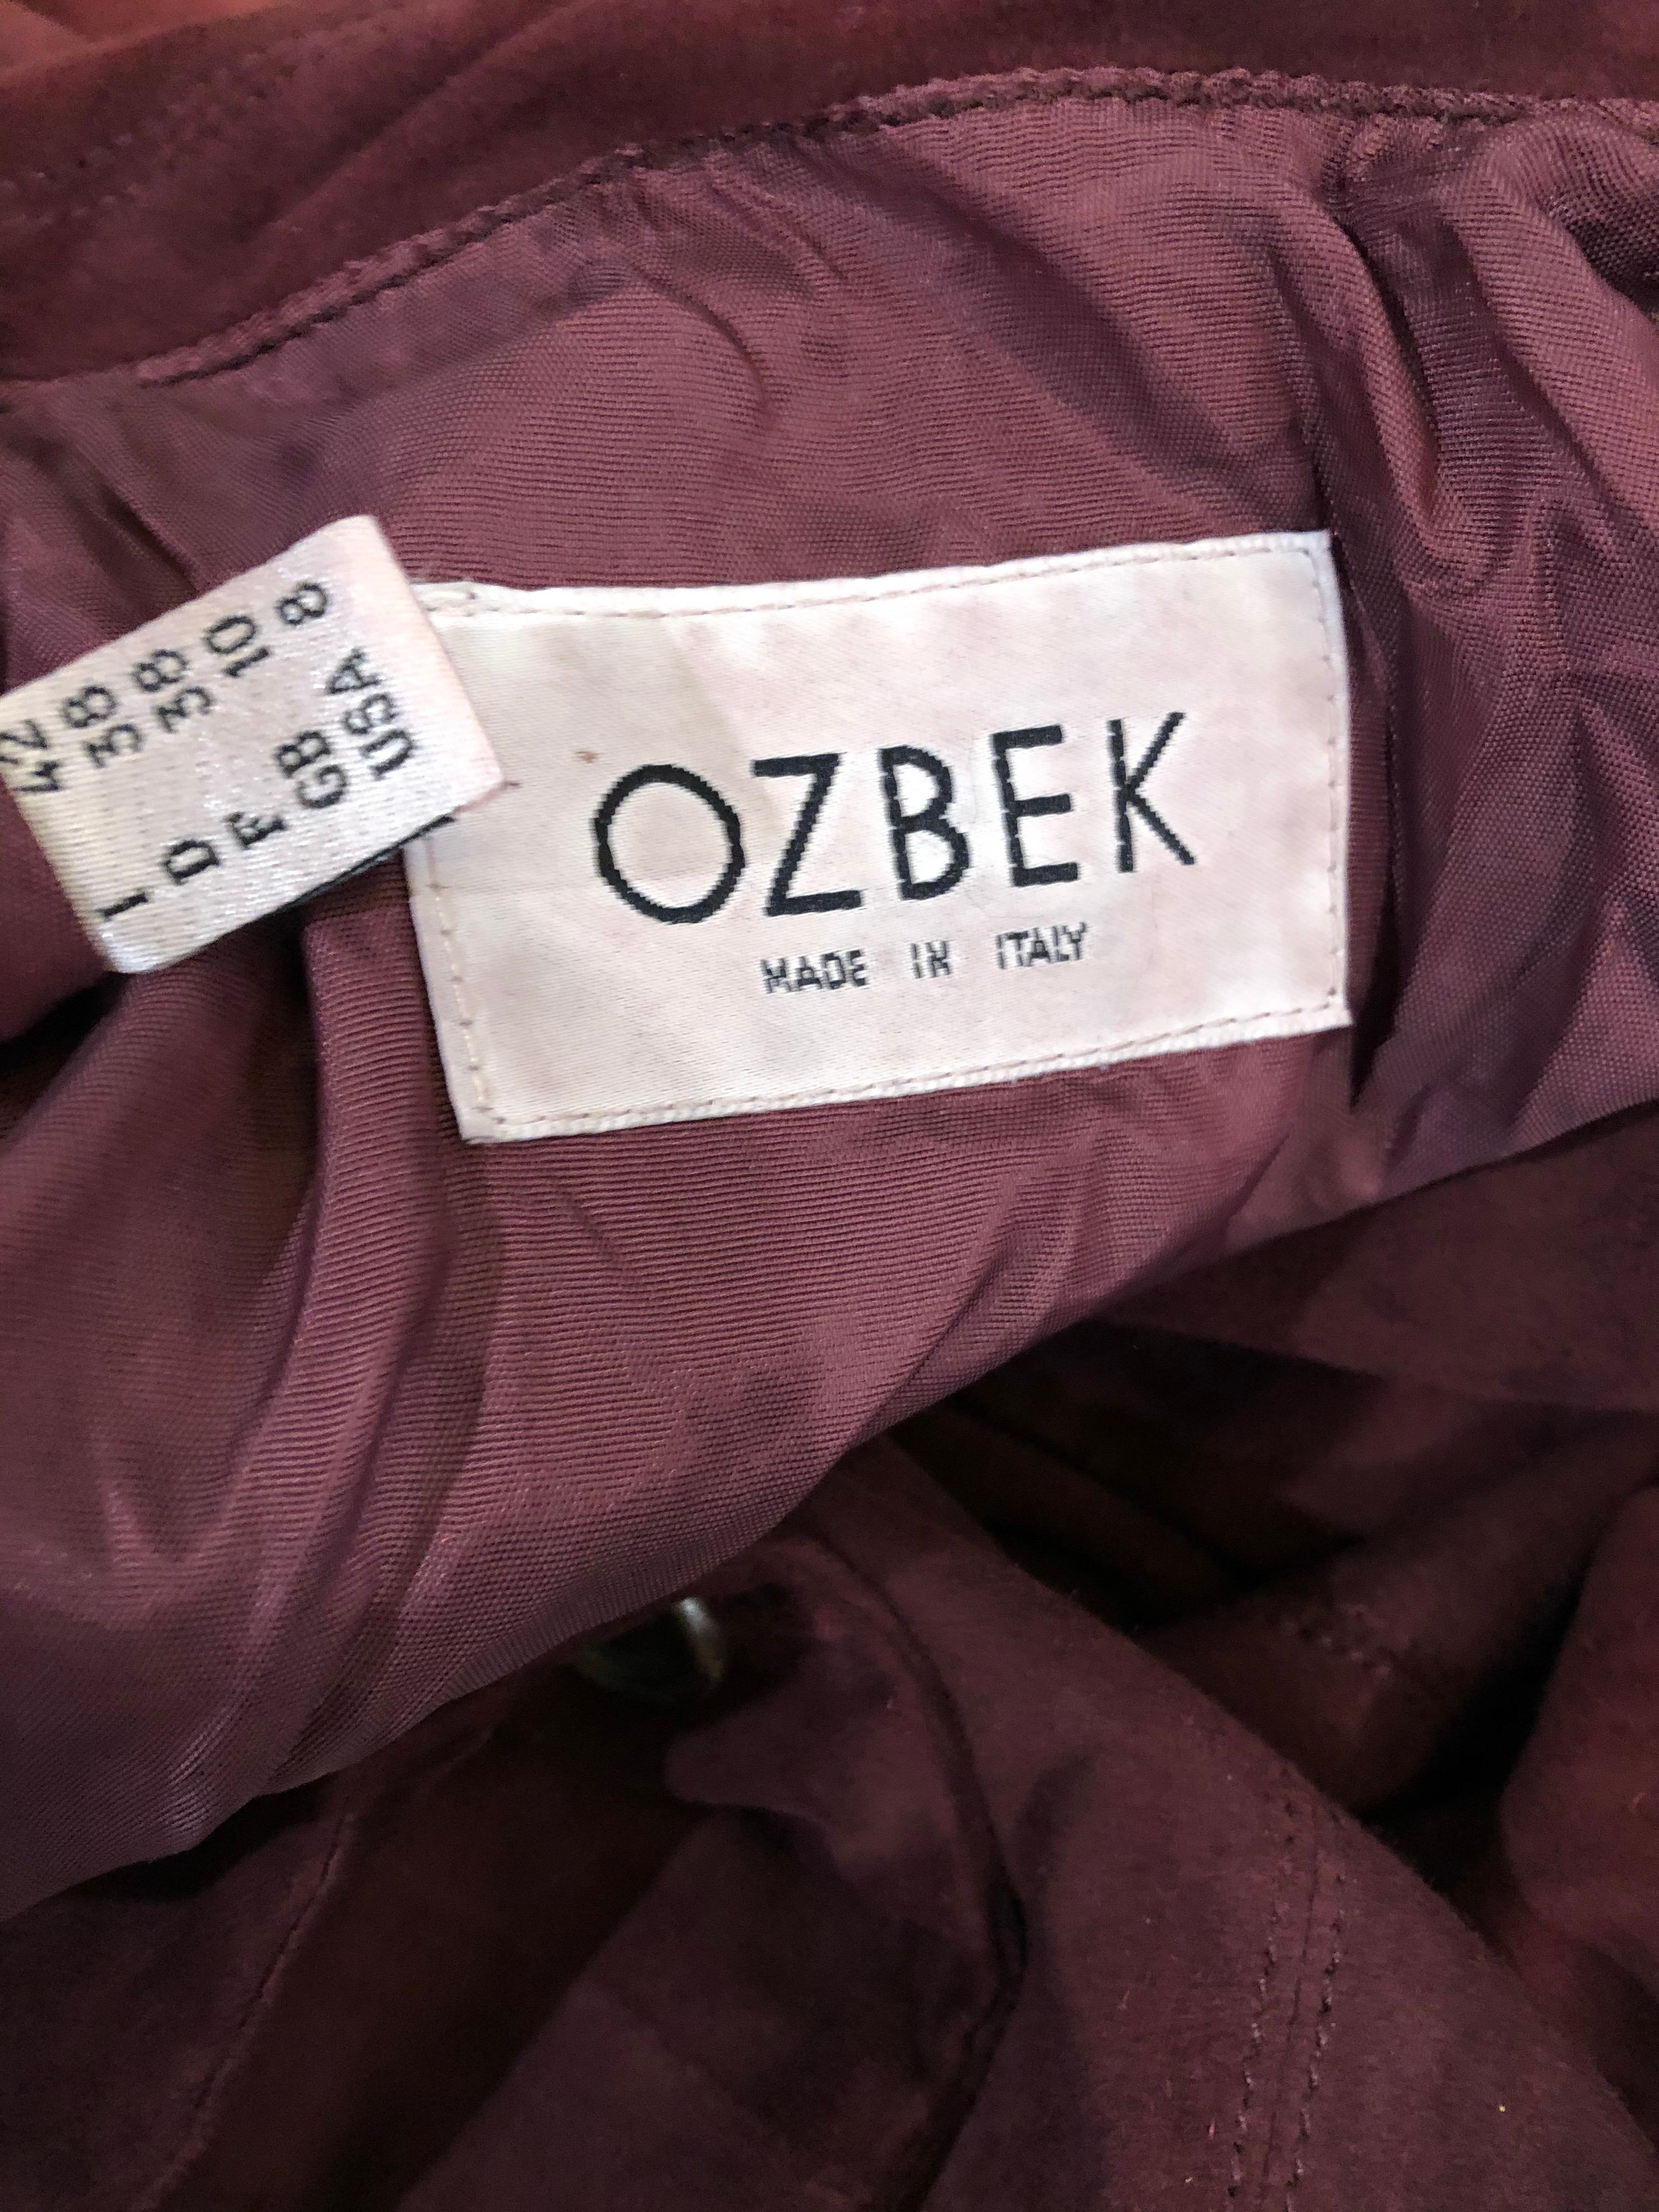 Ozbek 1990s Suede Leather Size 8 Burgundy Maroon Double Breasted Blazer Jacket For Sale 8